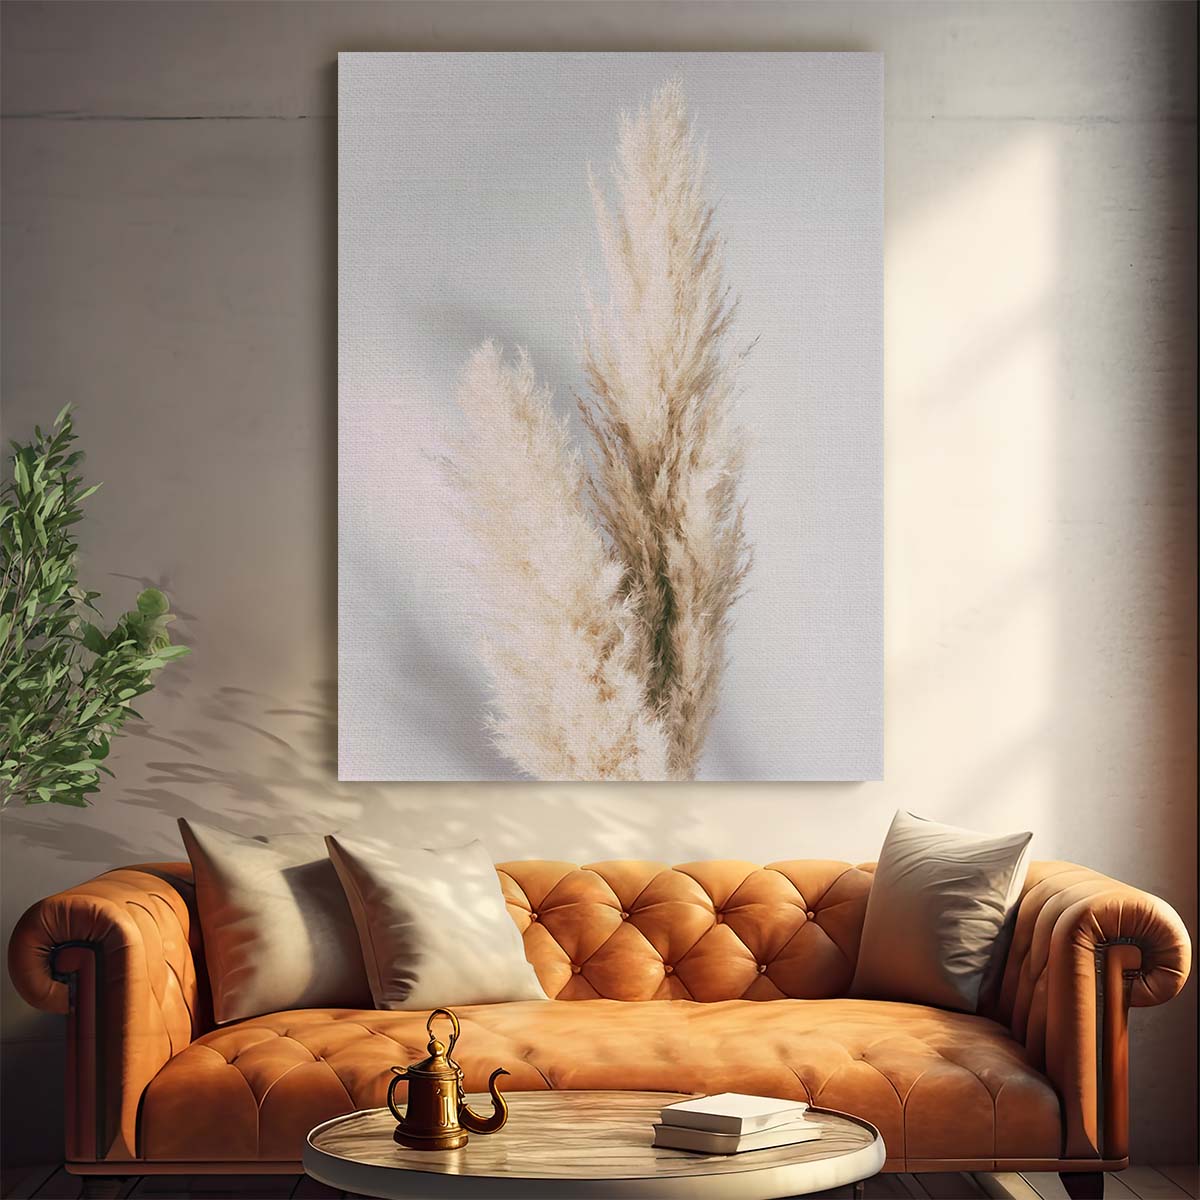 Soft Dried Pampas Grass Botanical Photography Wall Art - 1XStudio by Luxuriance Designs, made in USA